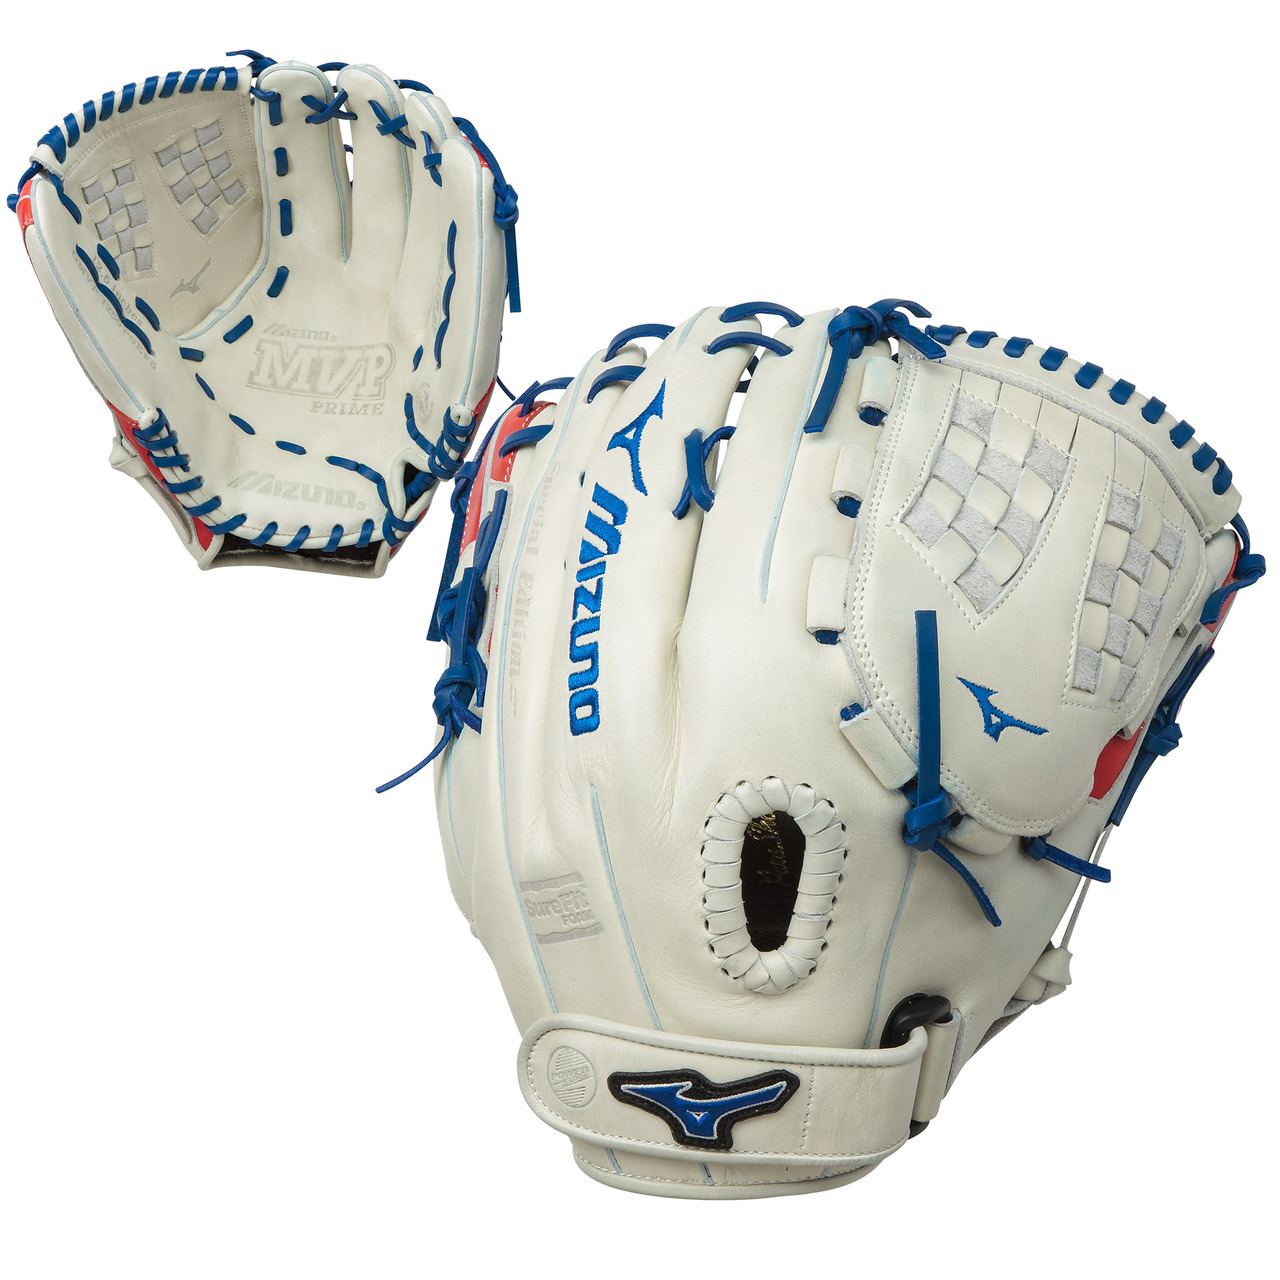 The MVP Prime SE fastpitch softball series gloves feature a Center Pocket Designed Pattern that naturally centers the pocket under the index finger for the most versatile break in possible. Professional style Bio Soft leather has the perfect balance of oil and softness for exceptional feel and firm control that serious players demand. Patent Pending Heel Flex Technology provides a more flexibleforgiving heel for the ultimate in feel and performance. UltraSoft palm liner provides excellent feeling and a soft finish while a Strong Edge Lace Design creates a more stable thumb and pinky. Plus Grip Thumb is an ultra comfortable padded thumb slot. - 12.5 Inch Fastpitch Model - Special Edition Colorway - Center Pocket Designed Pattern - Bio Soft Leather - Patent Pending Heel Flex Technology - UltraSoft Palm Liner - Strong Edge Lace Design - Plus Grip Thumb - V-Flex Notch for Easy Closure - PowerLock Wrist Closure - Gender Engineered for the Female Hand                                                              